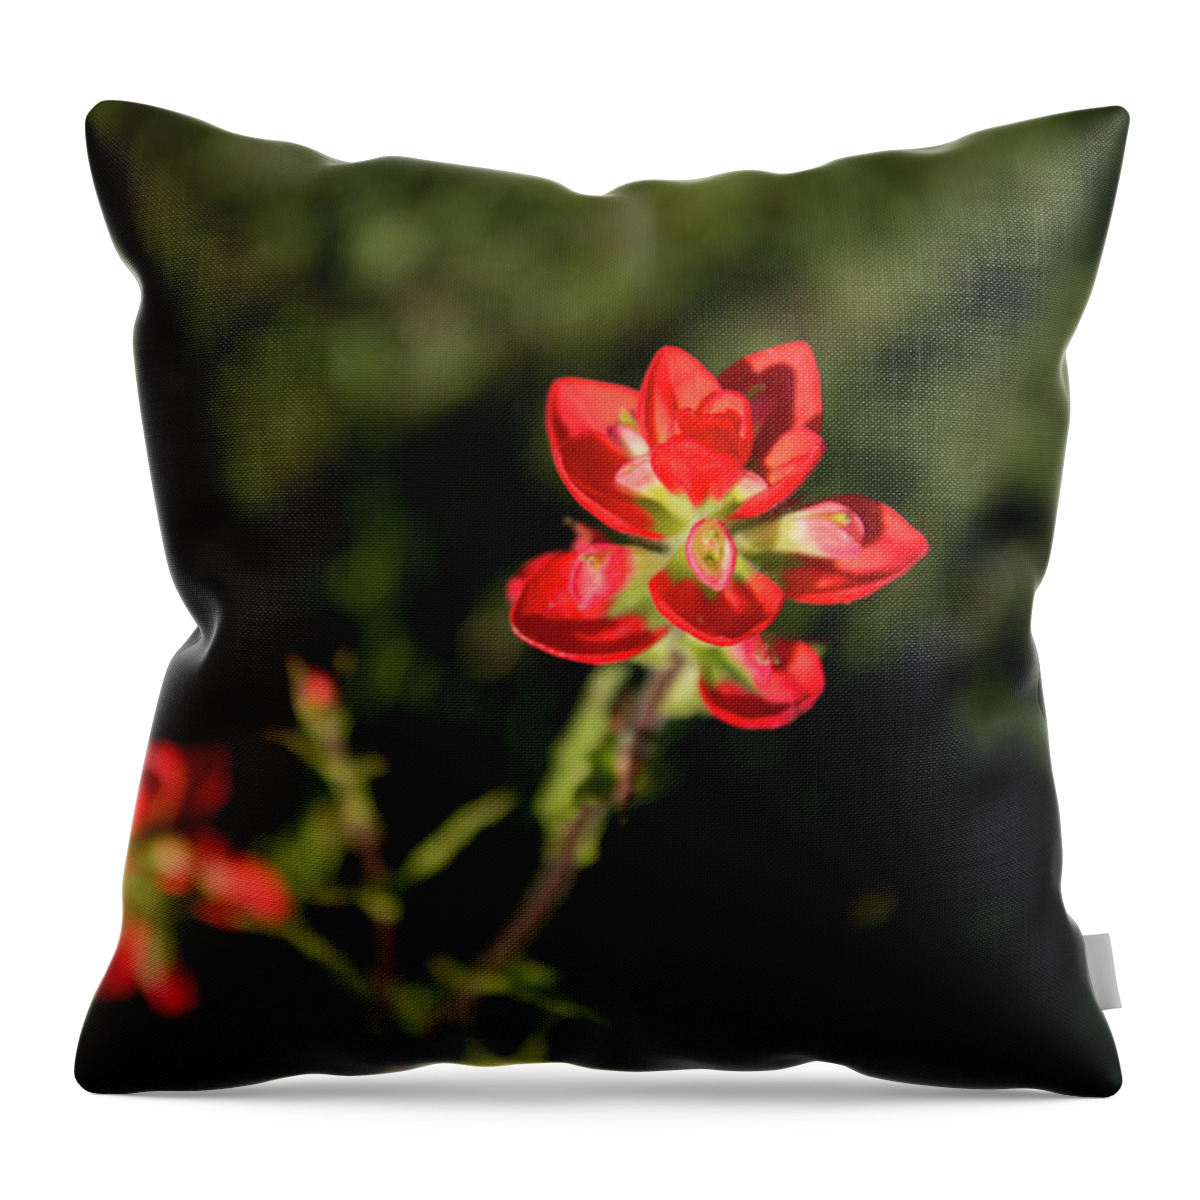 Flowers Throw Pillow featuring the photograph Two Paintbrush Blossoms by Frank Madia